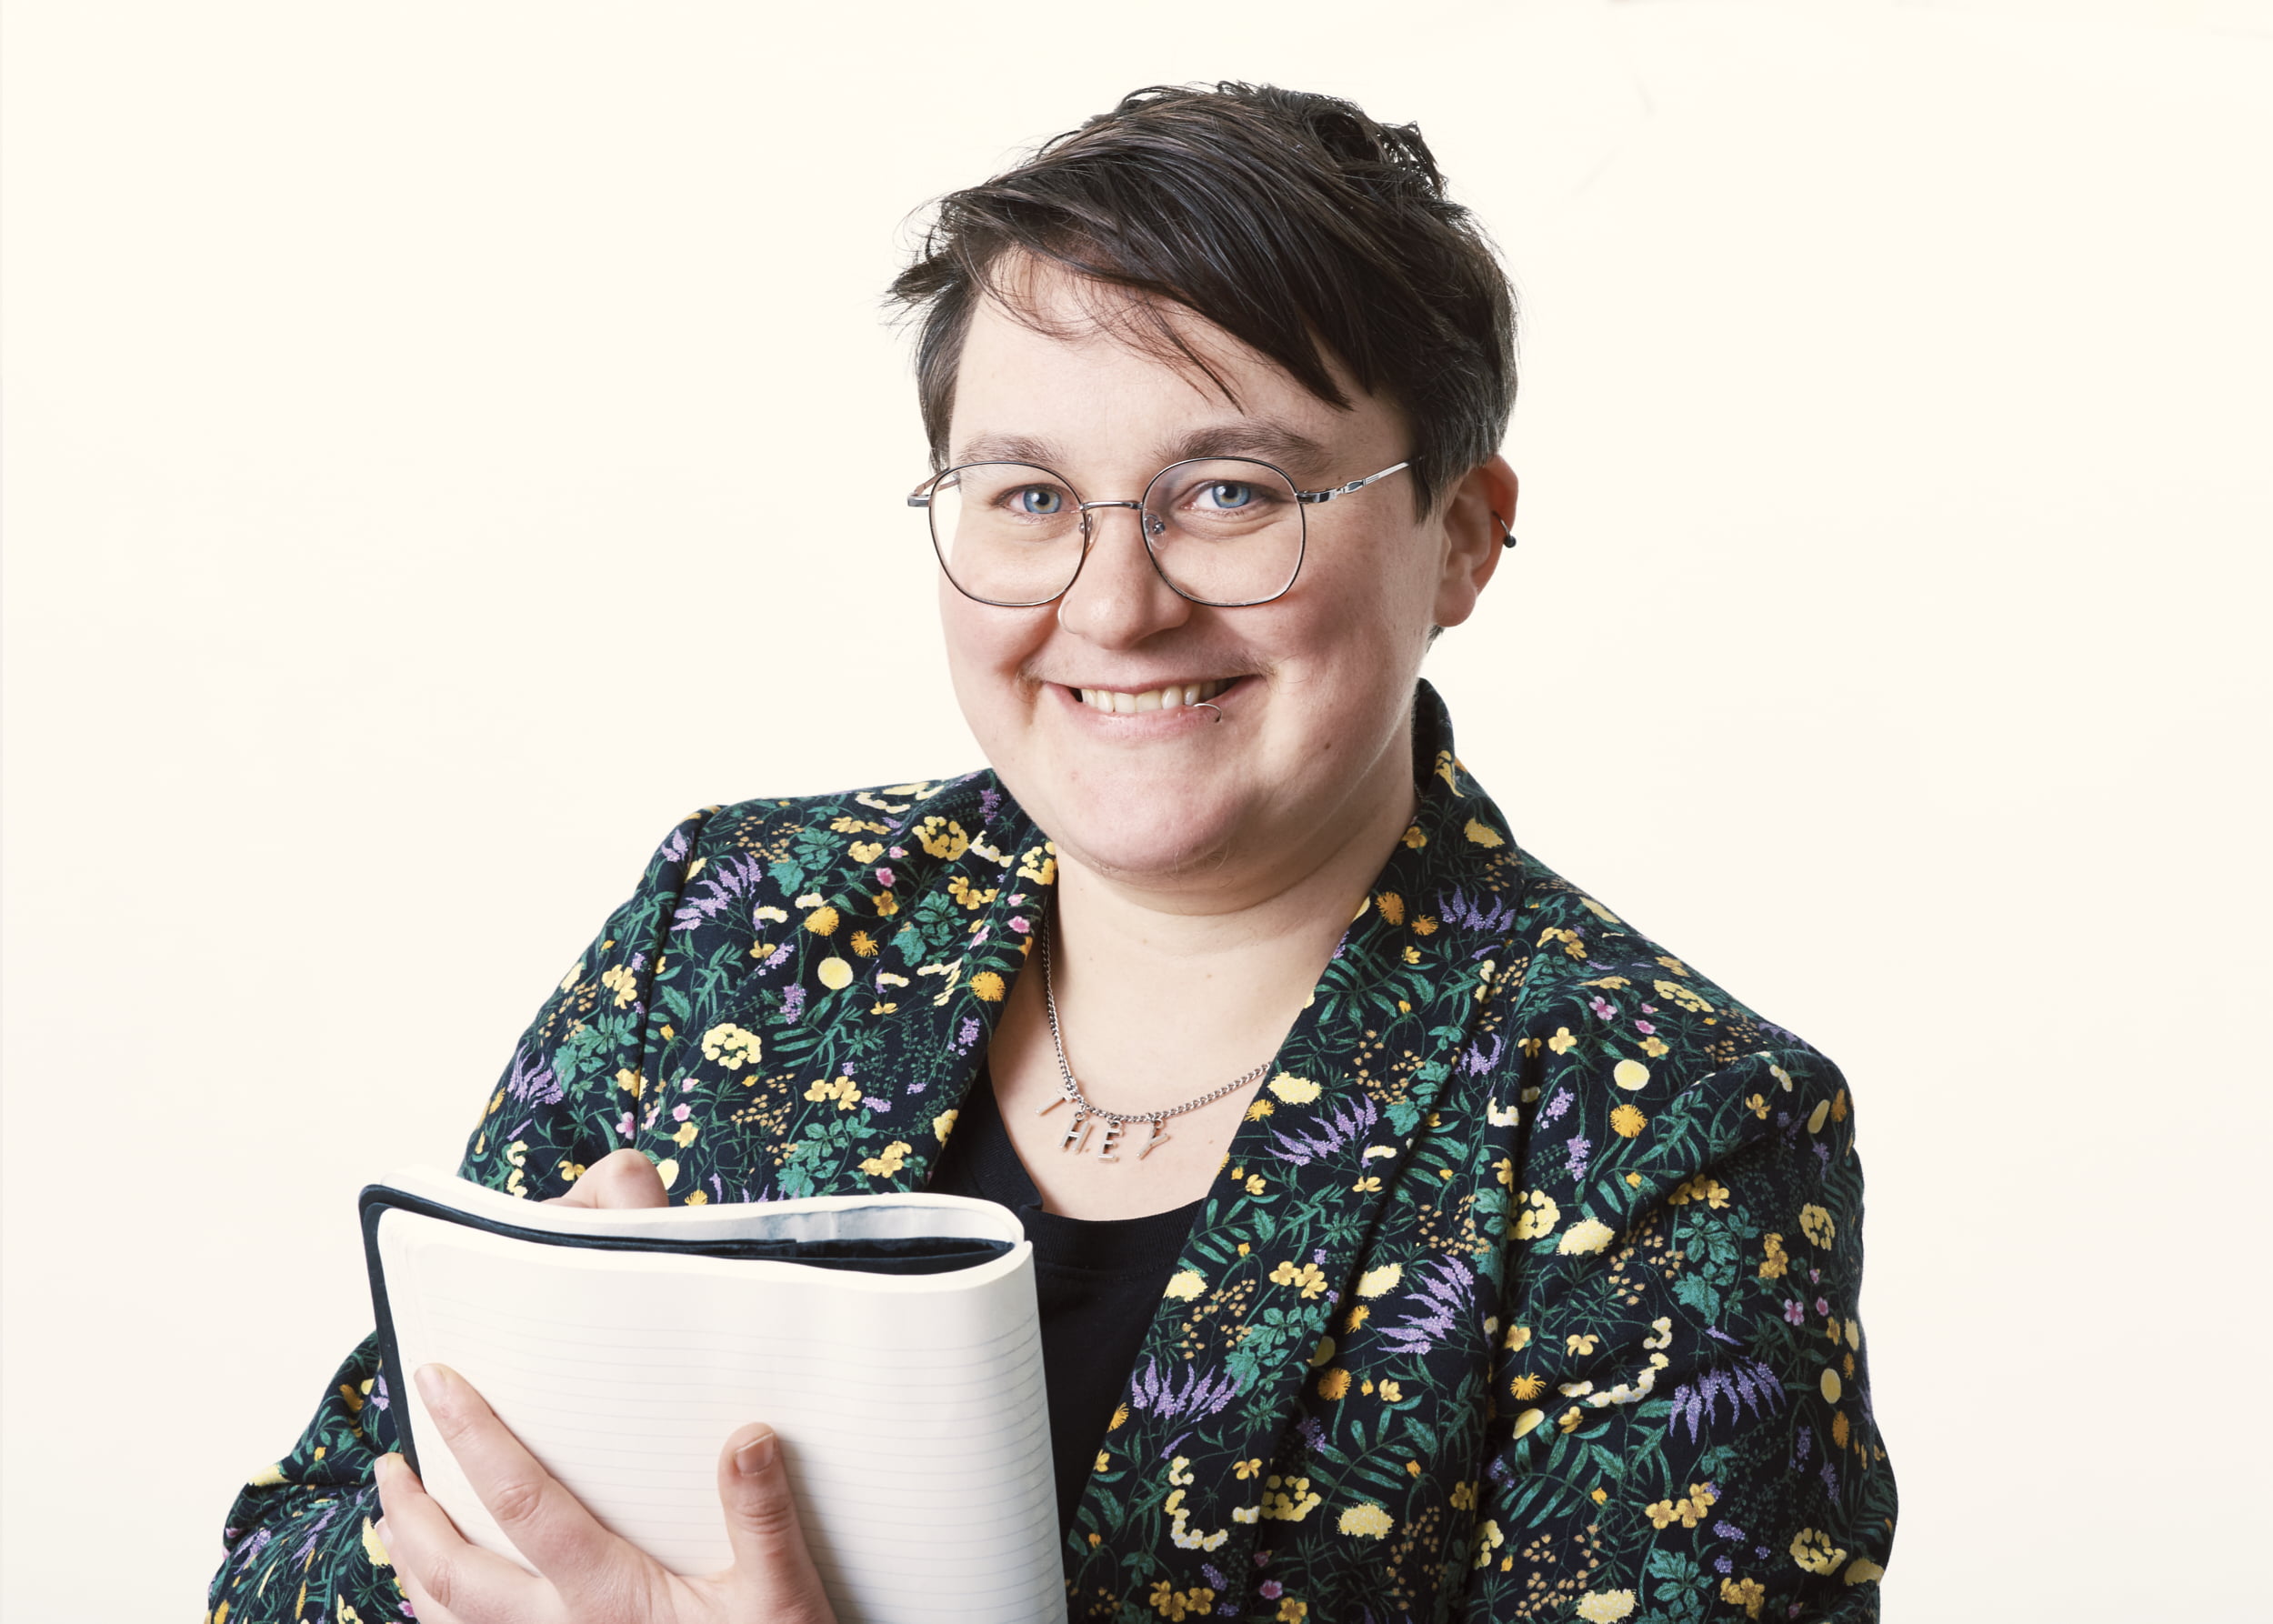 Lindon smiles, holding a leather bound book. Short hair, round glasses and wearing a patterned colourful blazer and black t-shirt